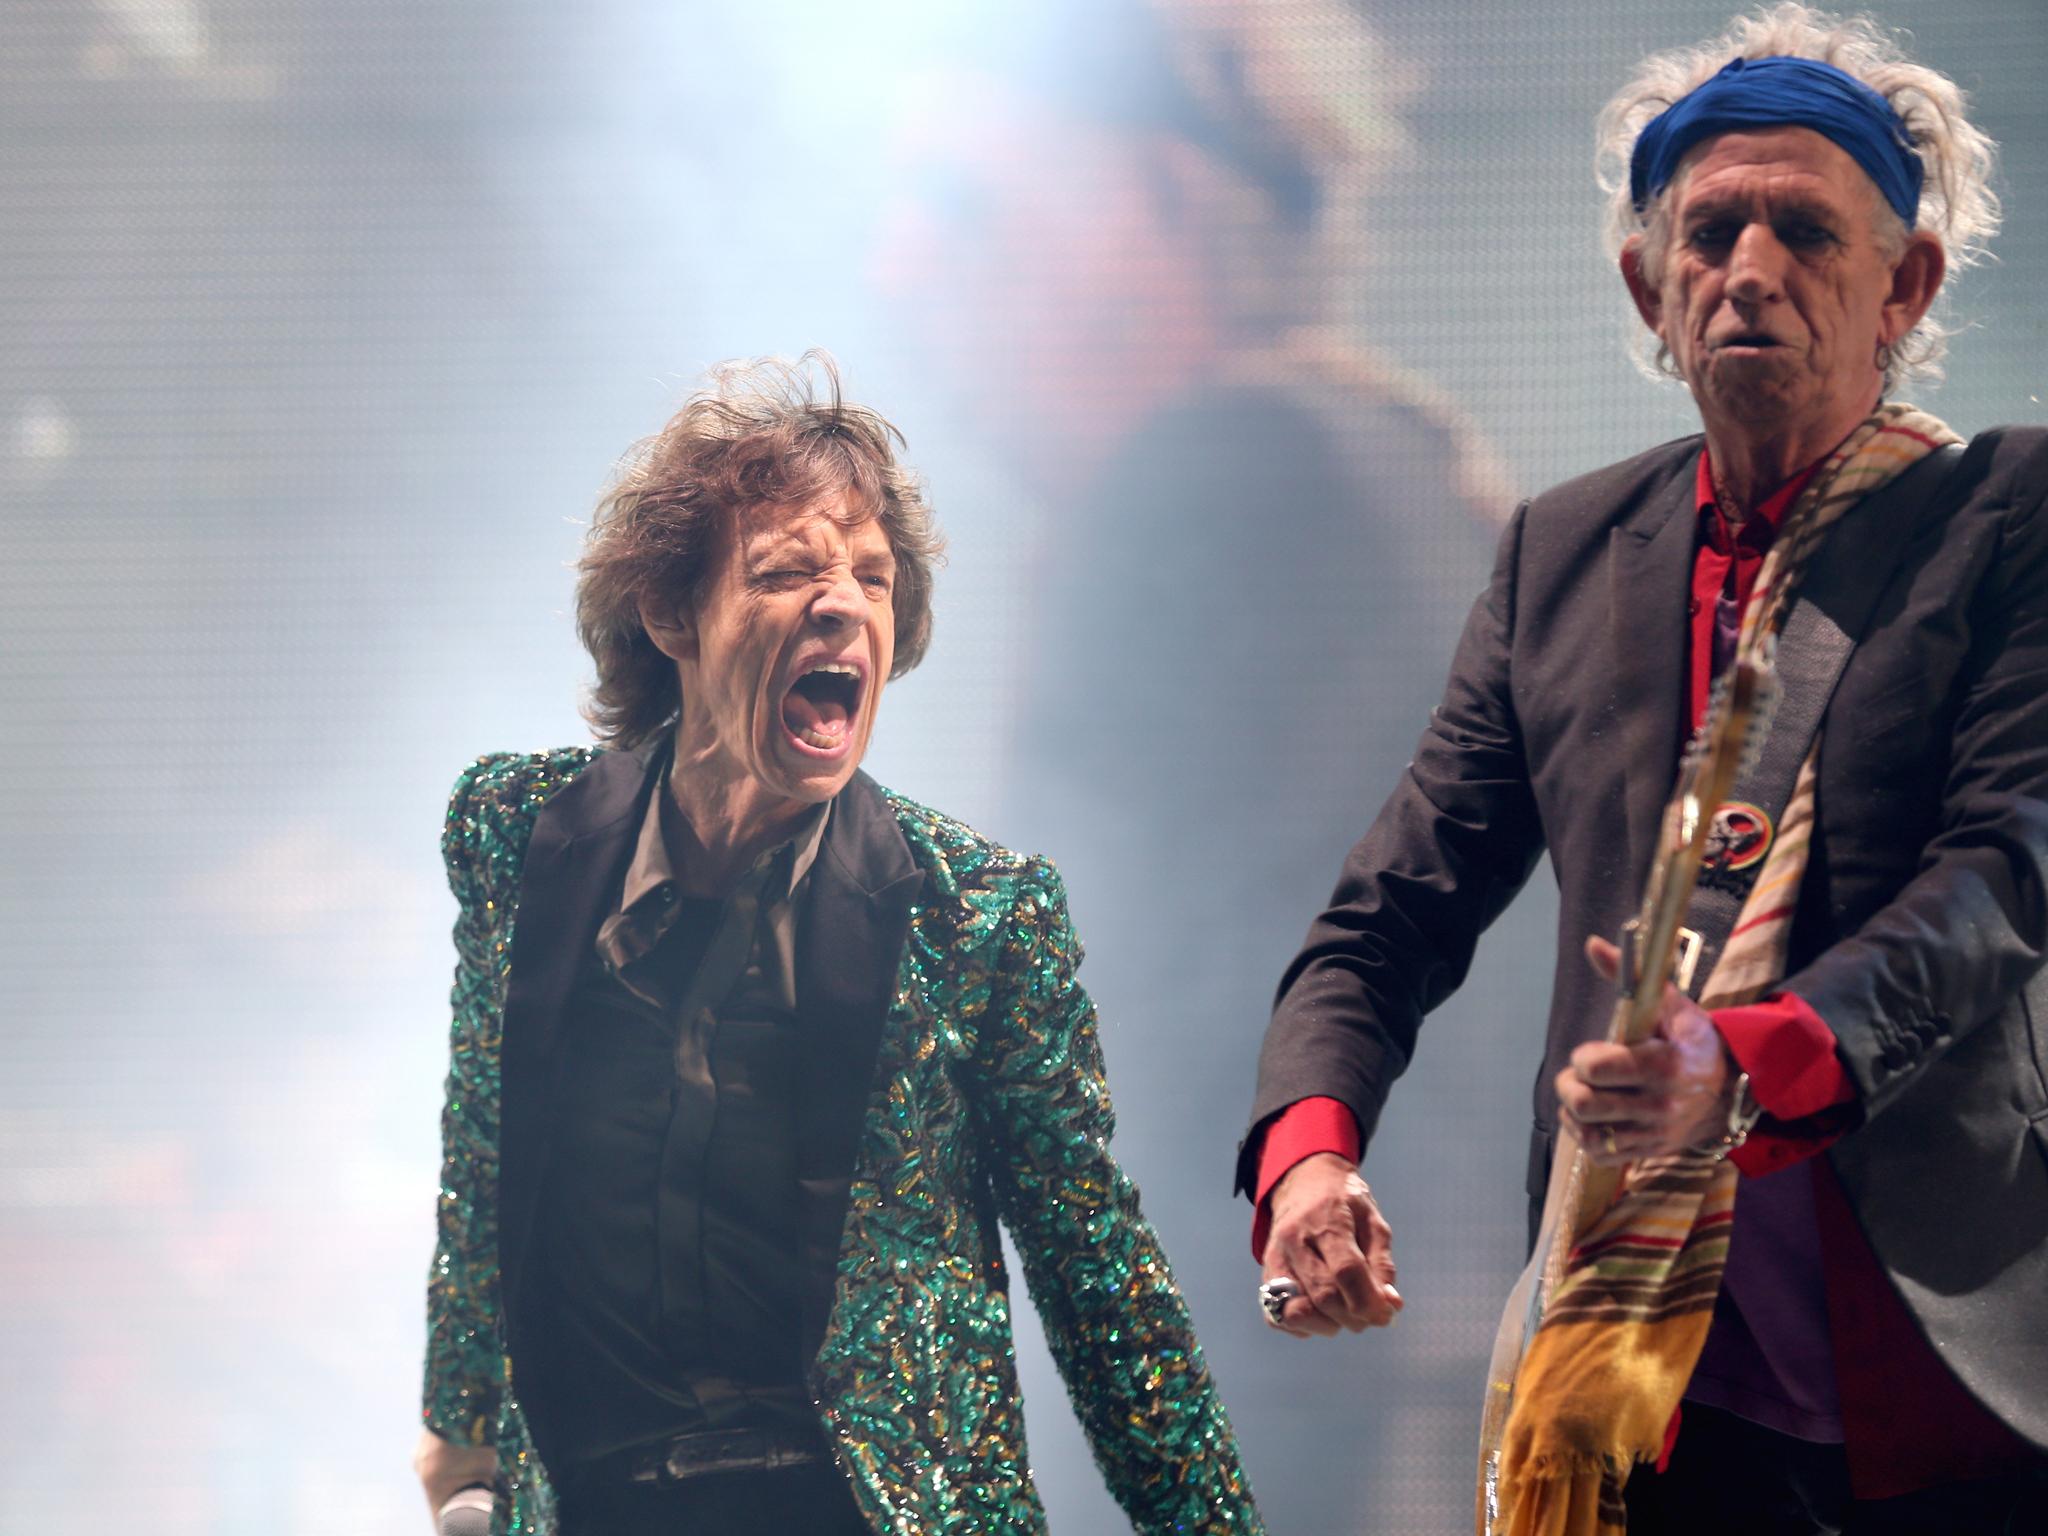 Sympathy for the old devil: the reaction of the Stones frontman to being called a ‘randy old bastard’ by his songwriting partner of half a century is not known